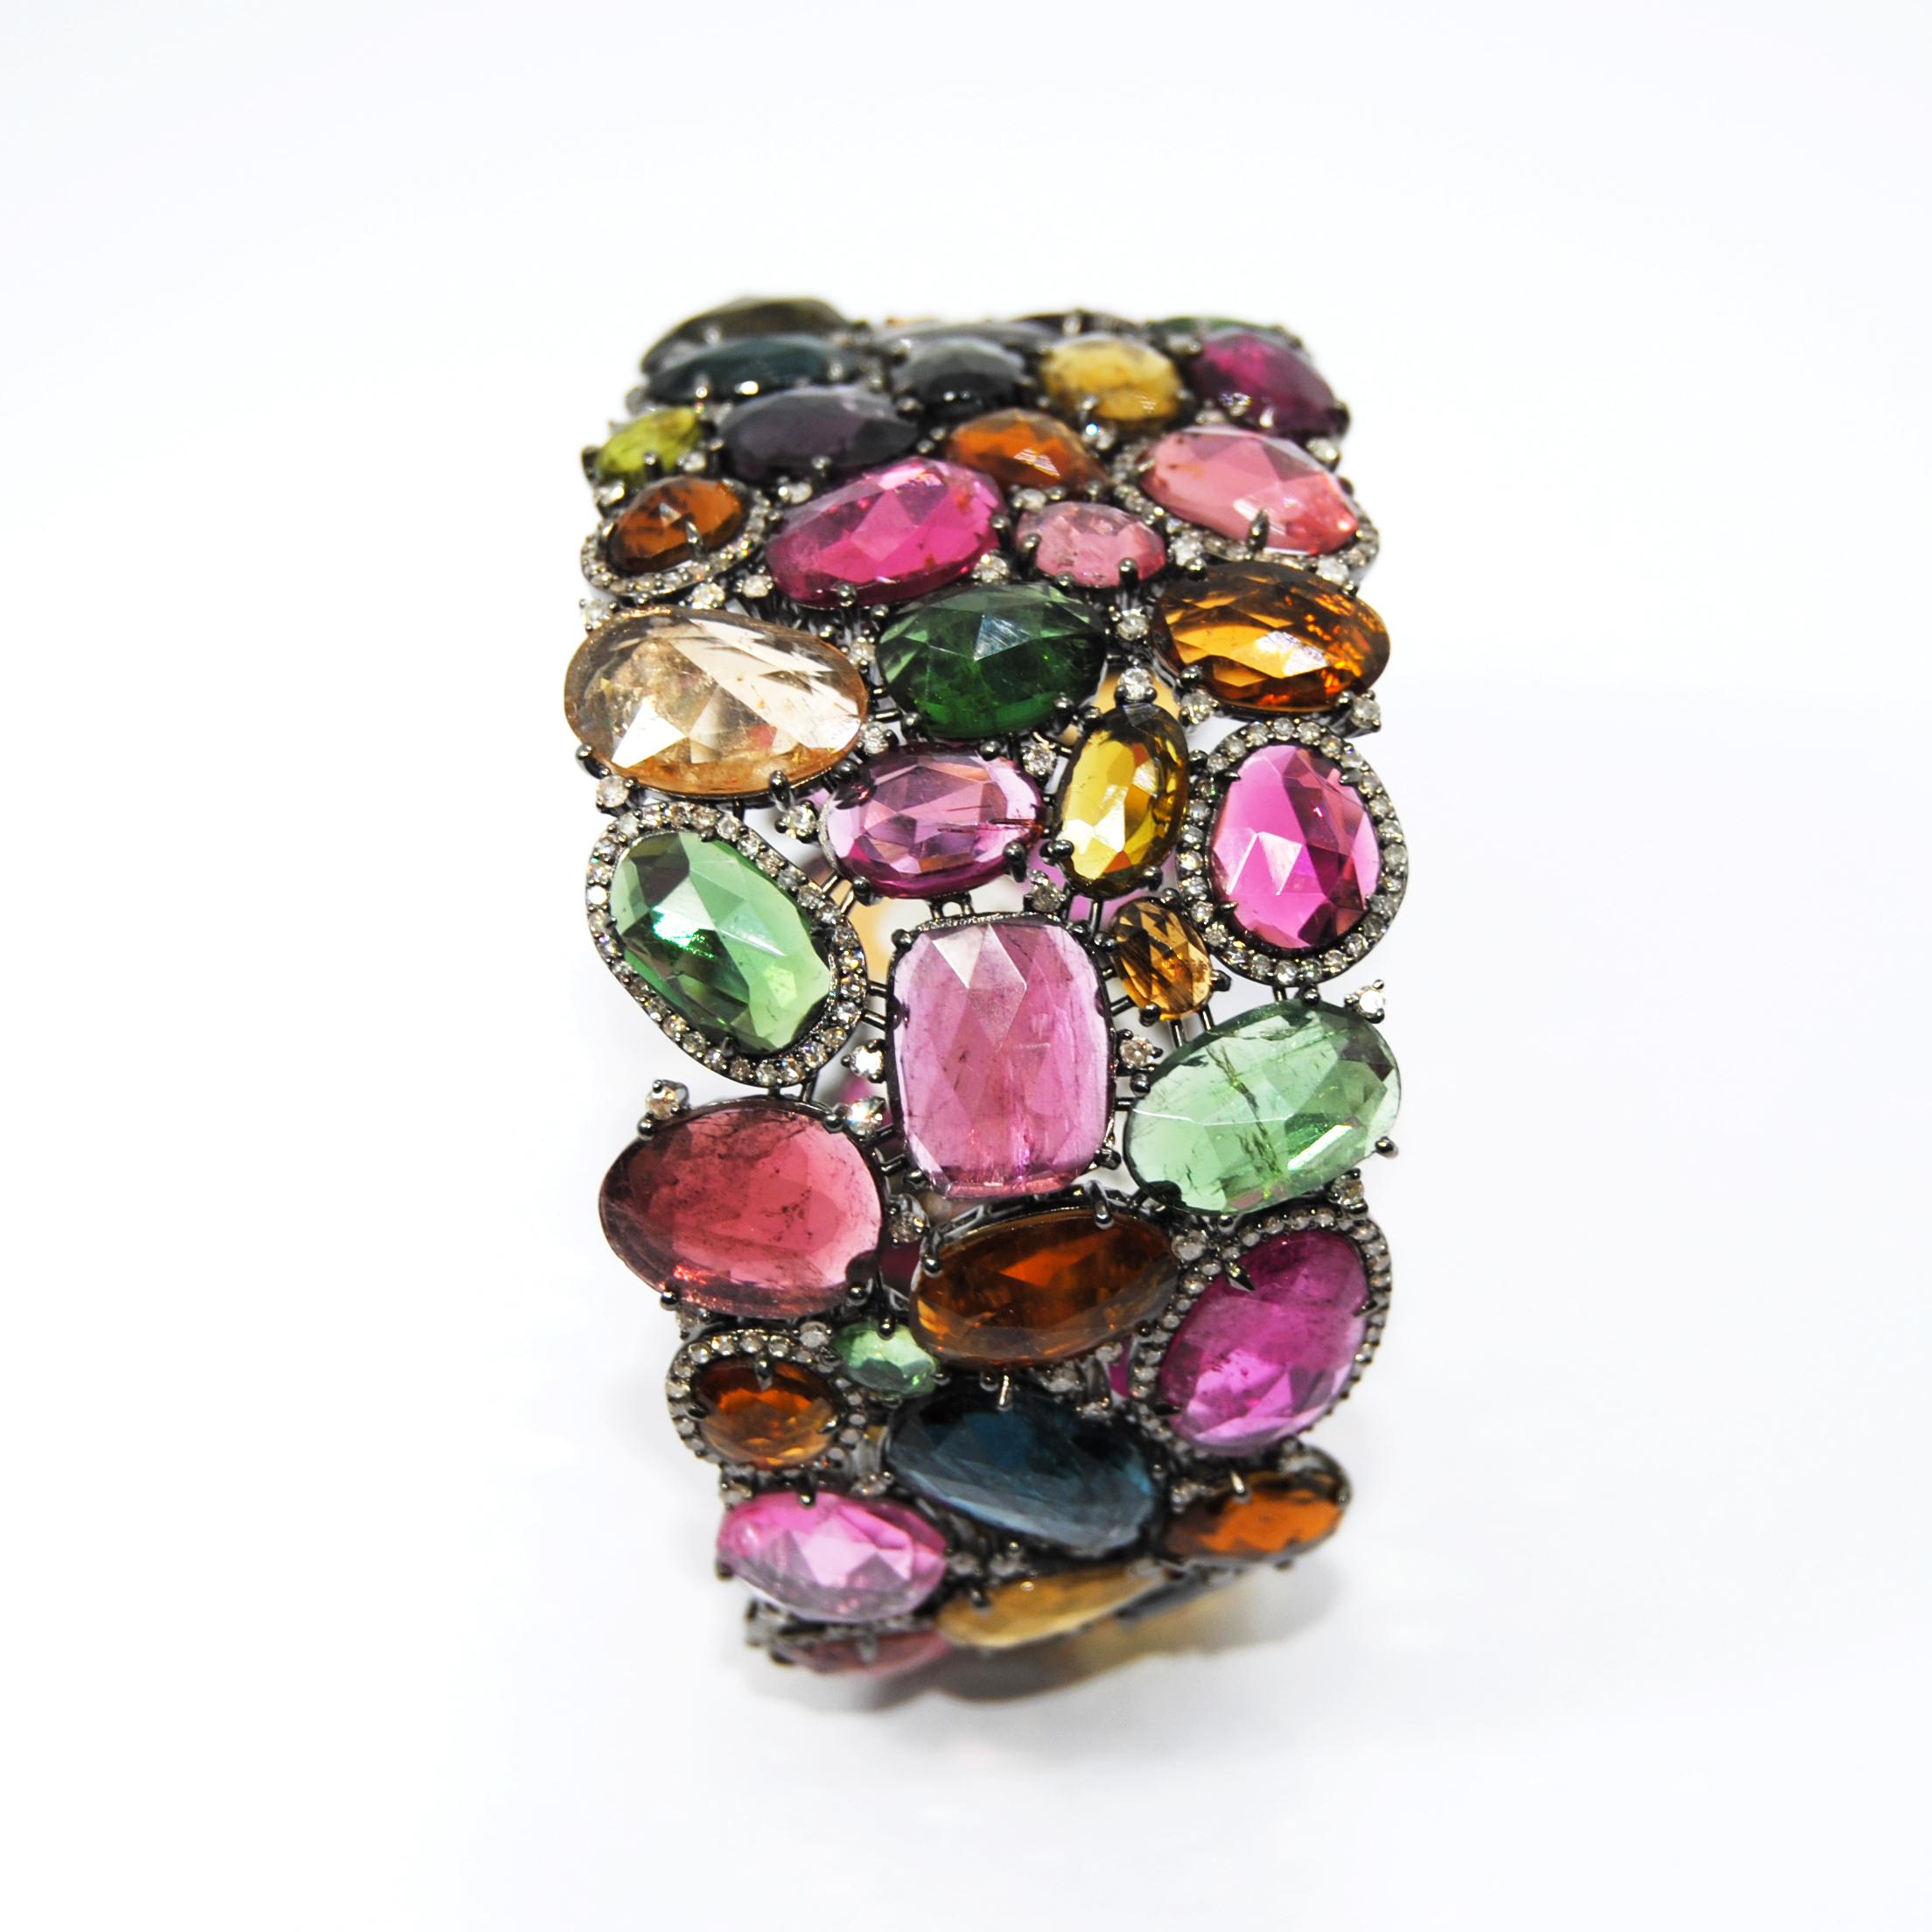 Diamonds and Tourmalines Clamper Bracelet Made of 18 Karat Gold and ...